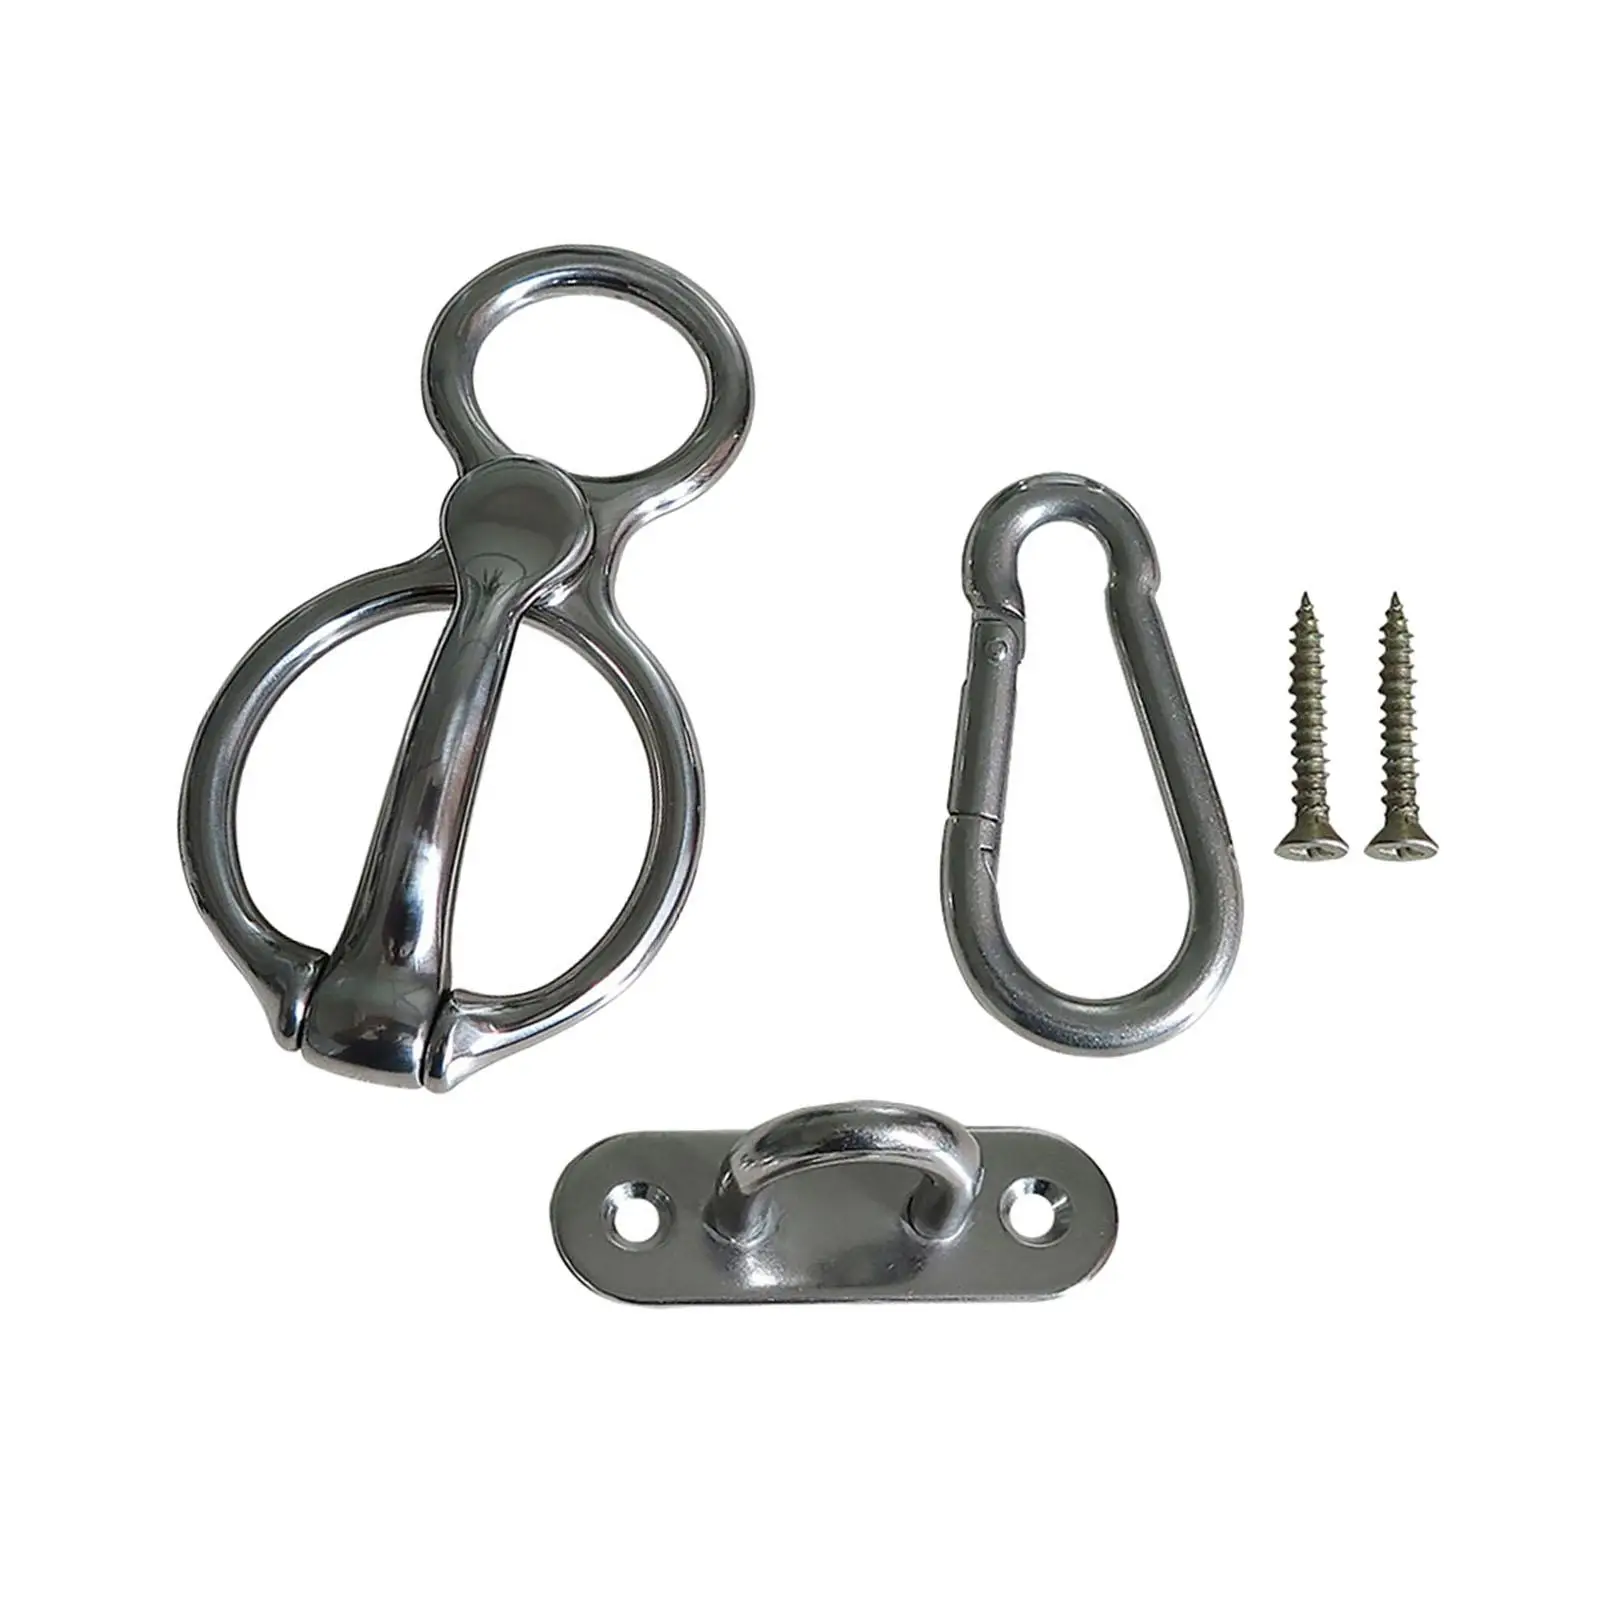 Horse Tie Ring with Eye Bolt Durable Prevent Horses from Pulling Back Fasteners Livestock Tie Off Quick Snap Safety Accessories